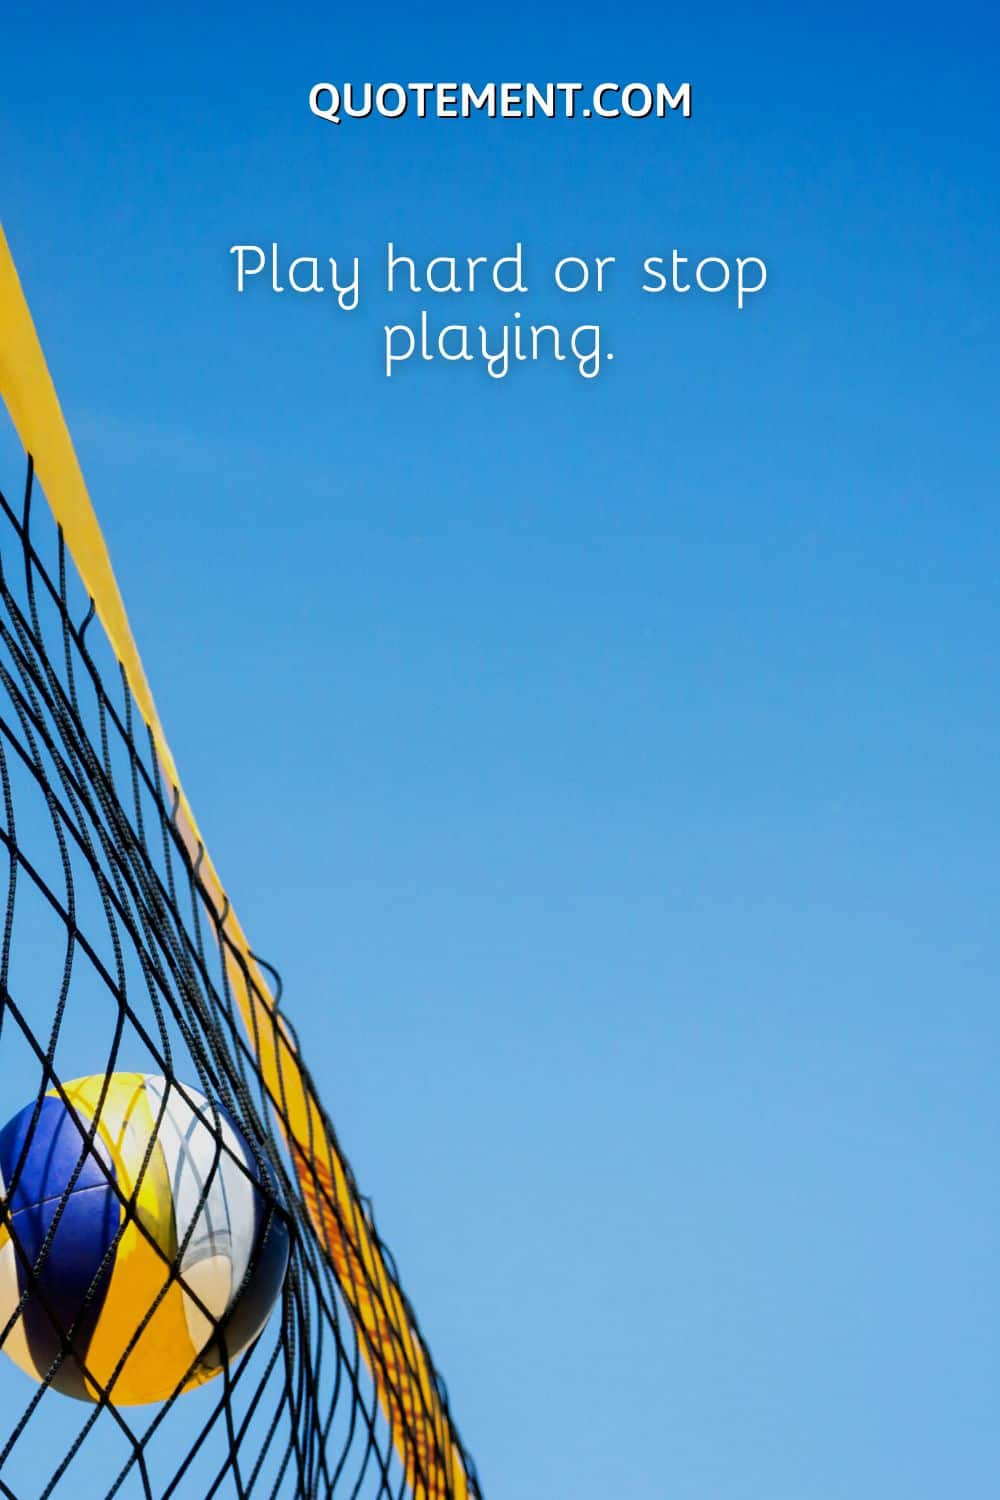 Play hard or stop playing.